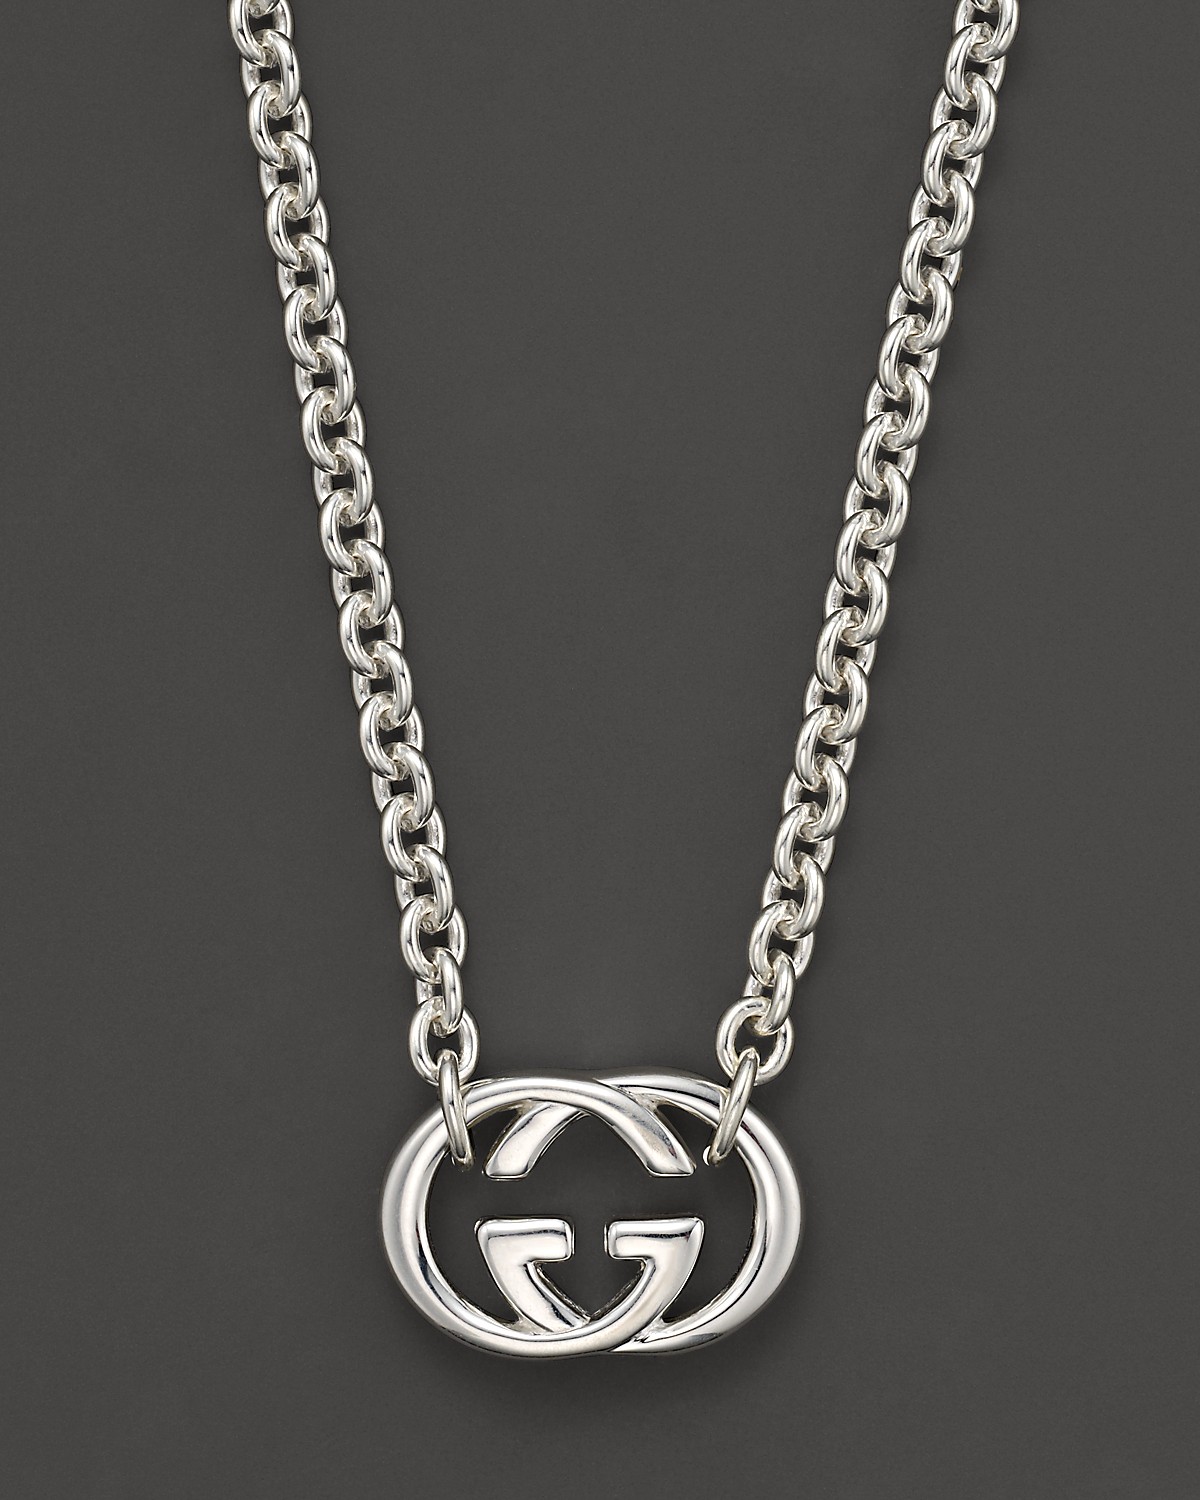 Gucci Latest Men Fashion Accessories Collection - Best Articles for Gents - Necklace (2)